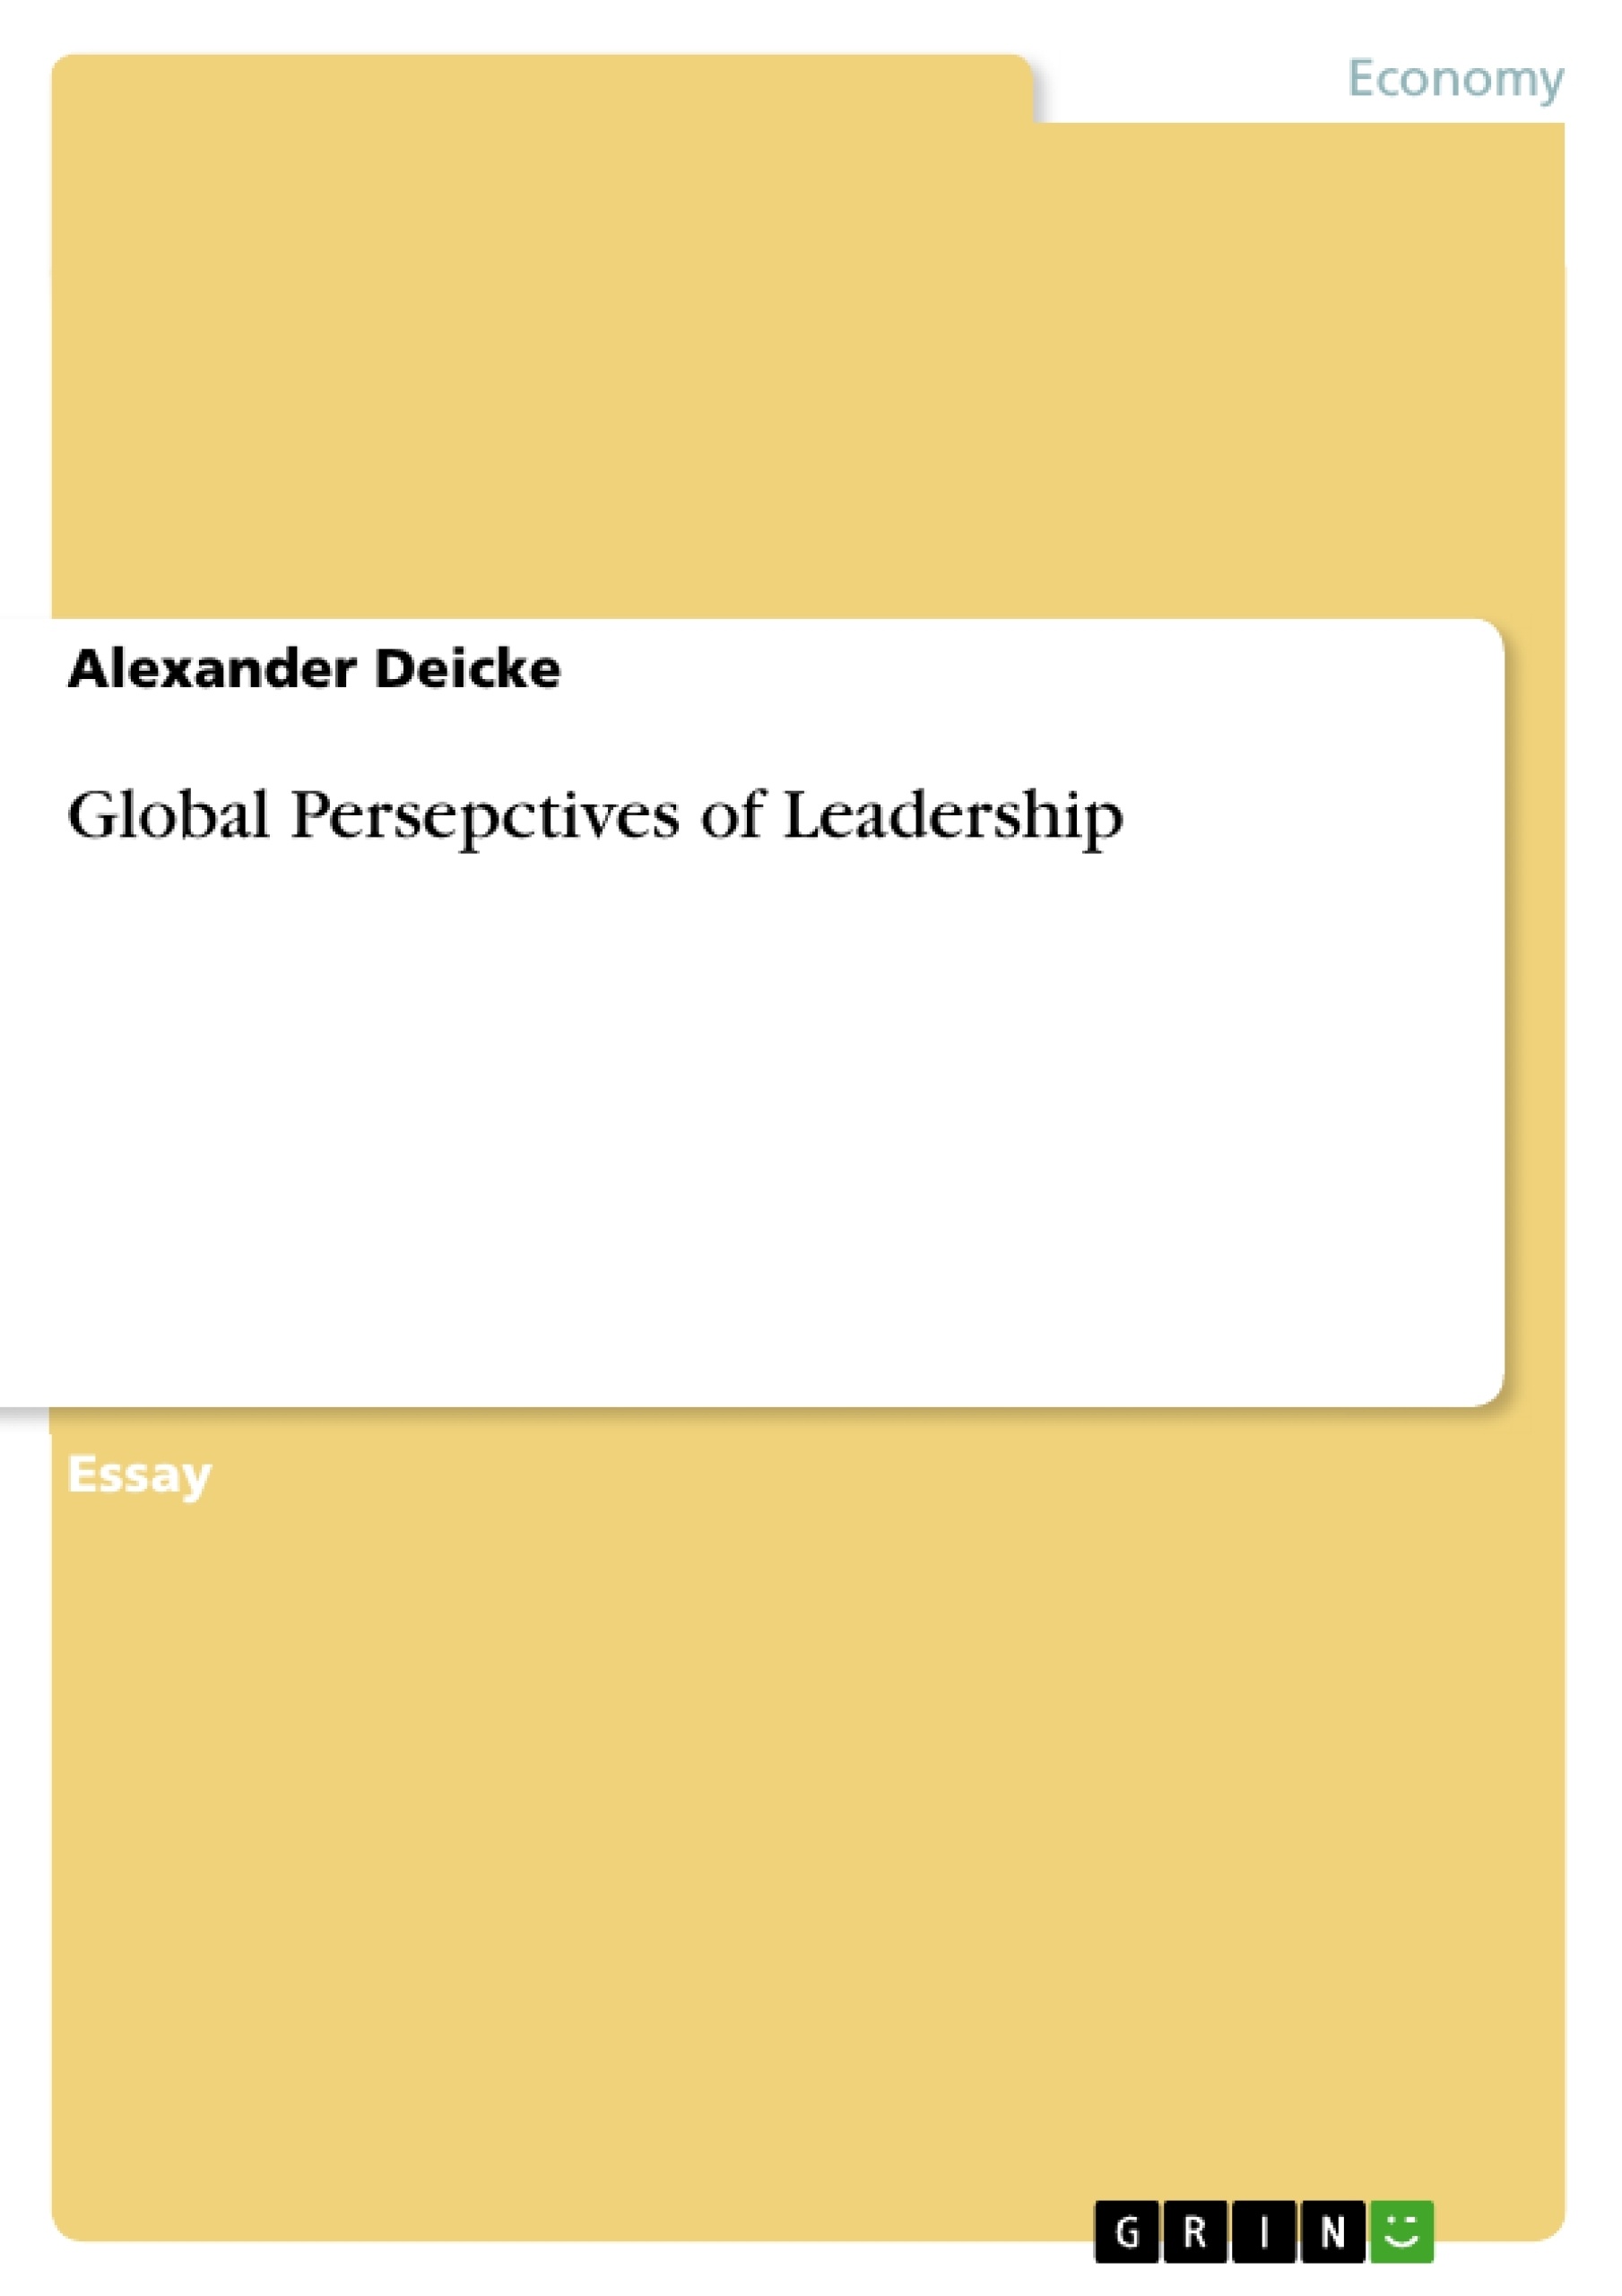 Title: Global Persepctives of Leadership